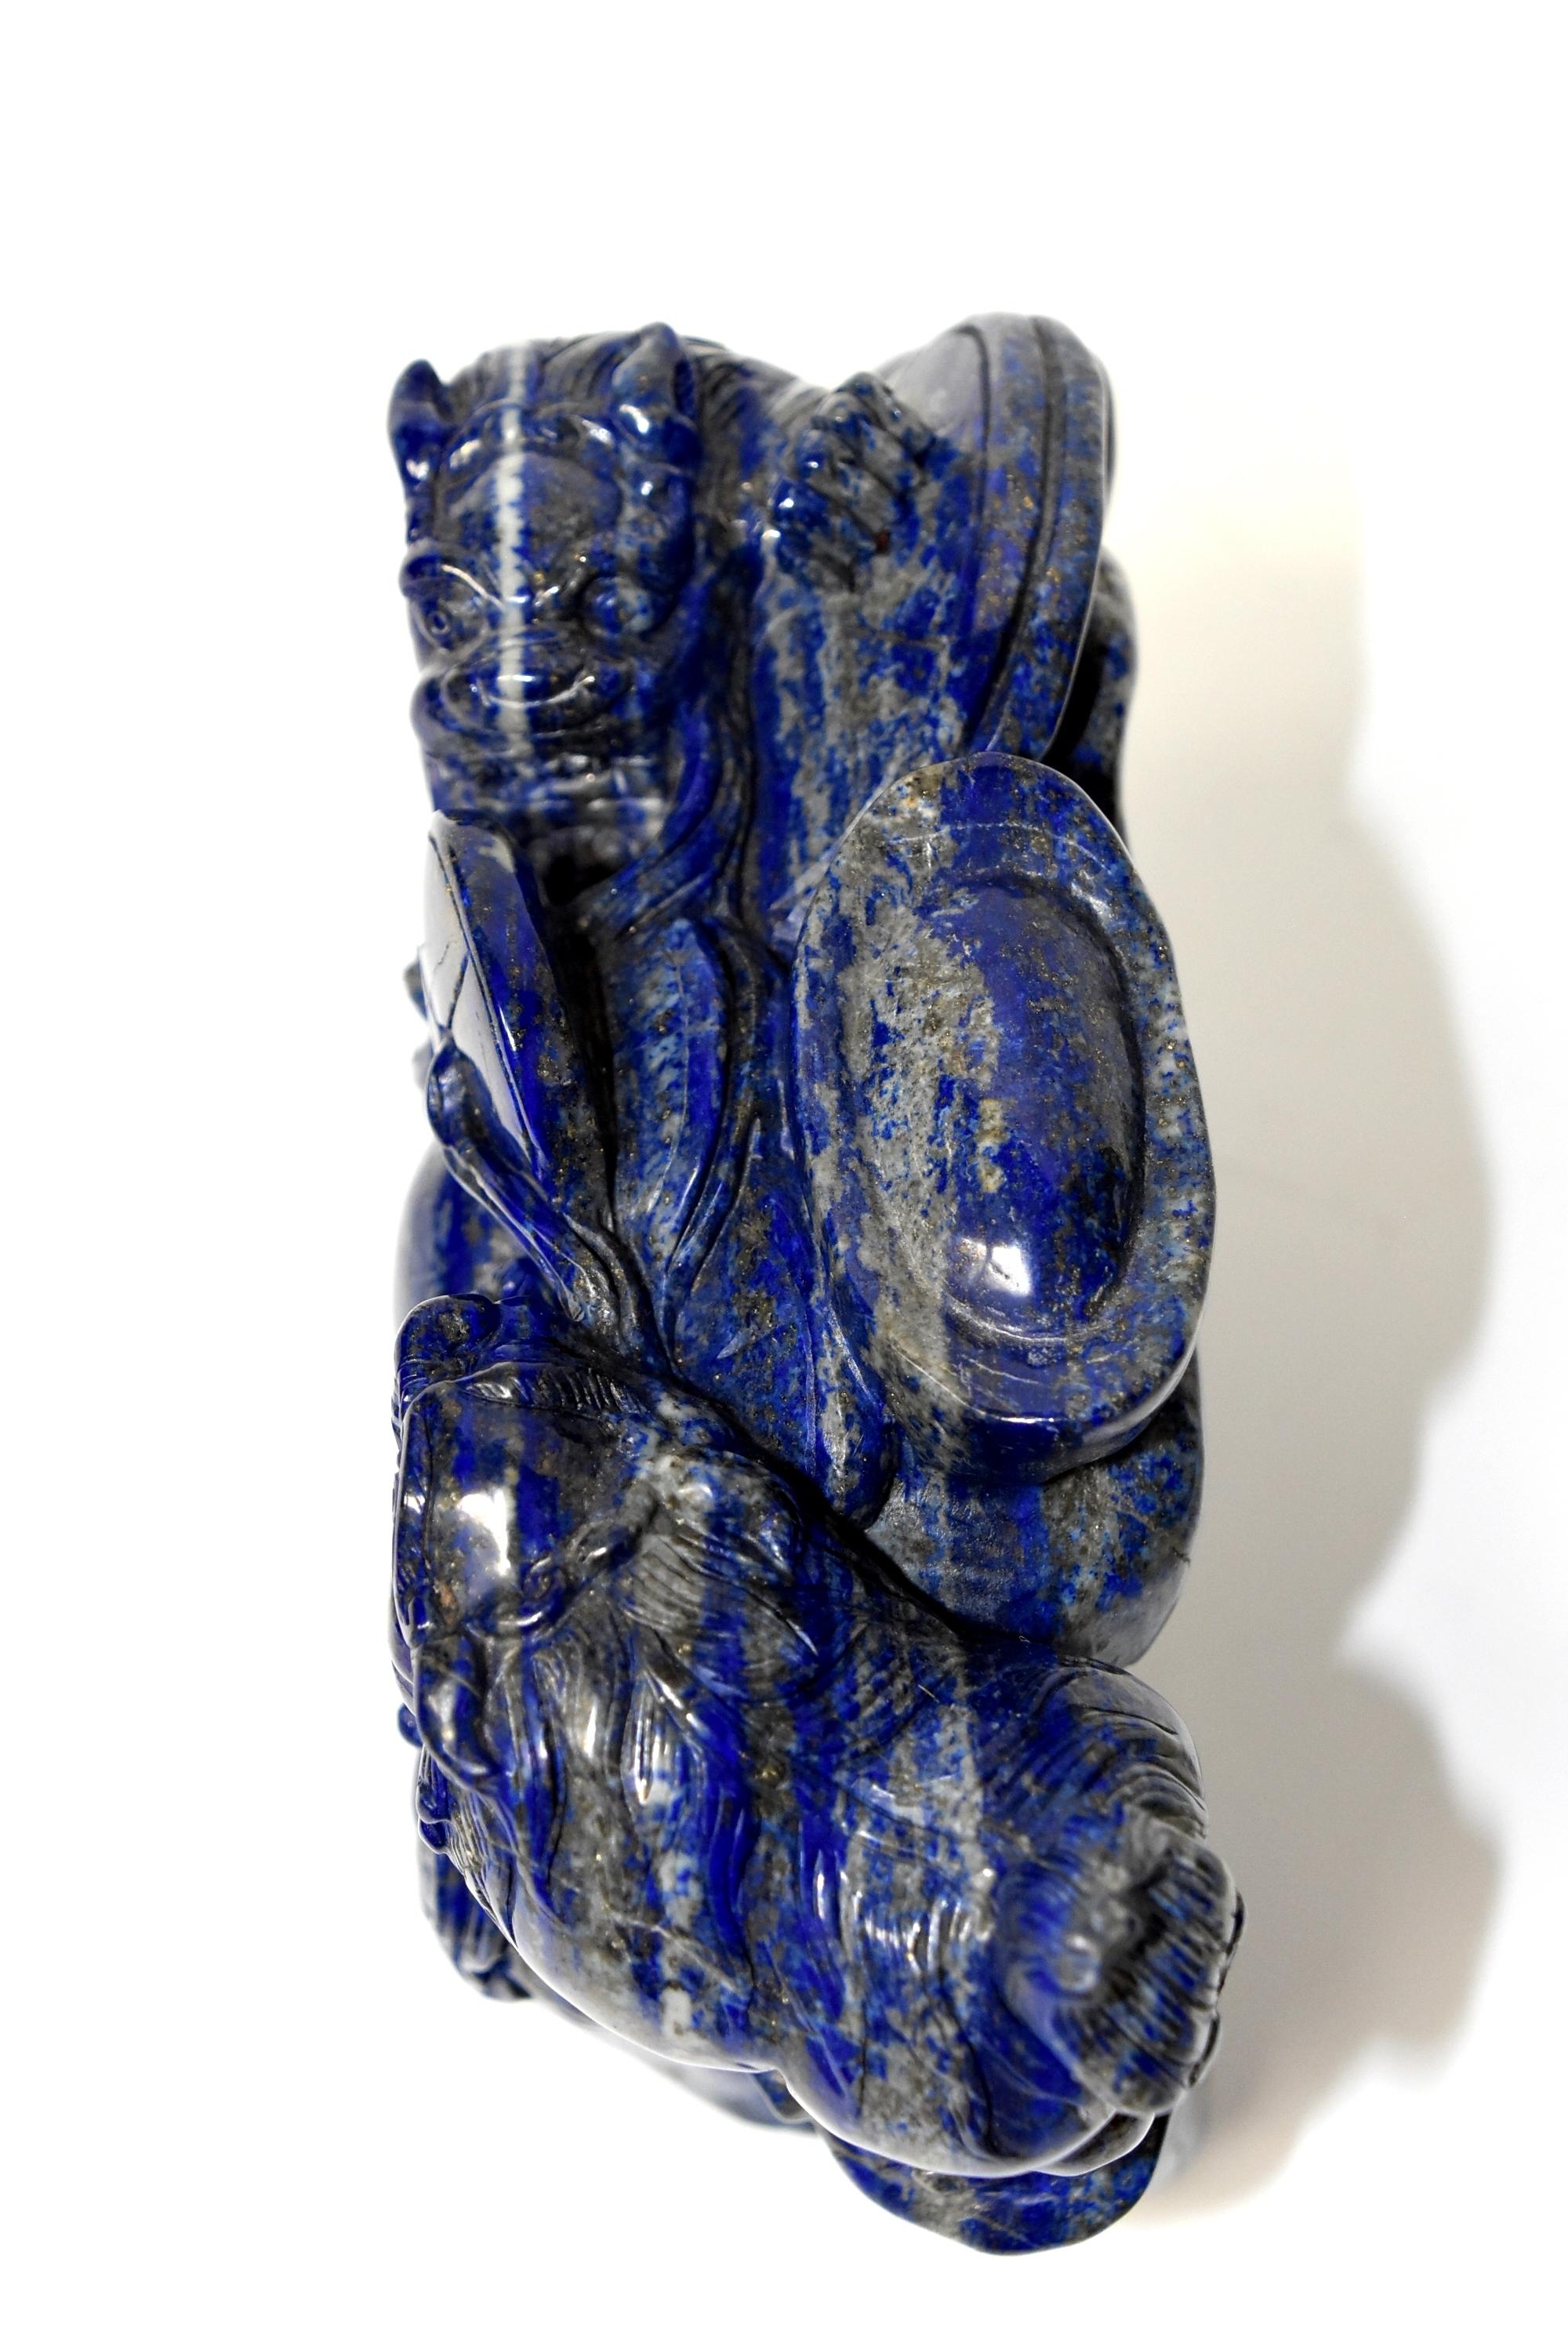 Natural Lapis Lazuli 8 lb Block with Carved Lions 8